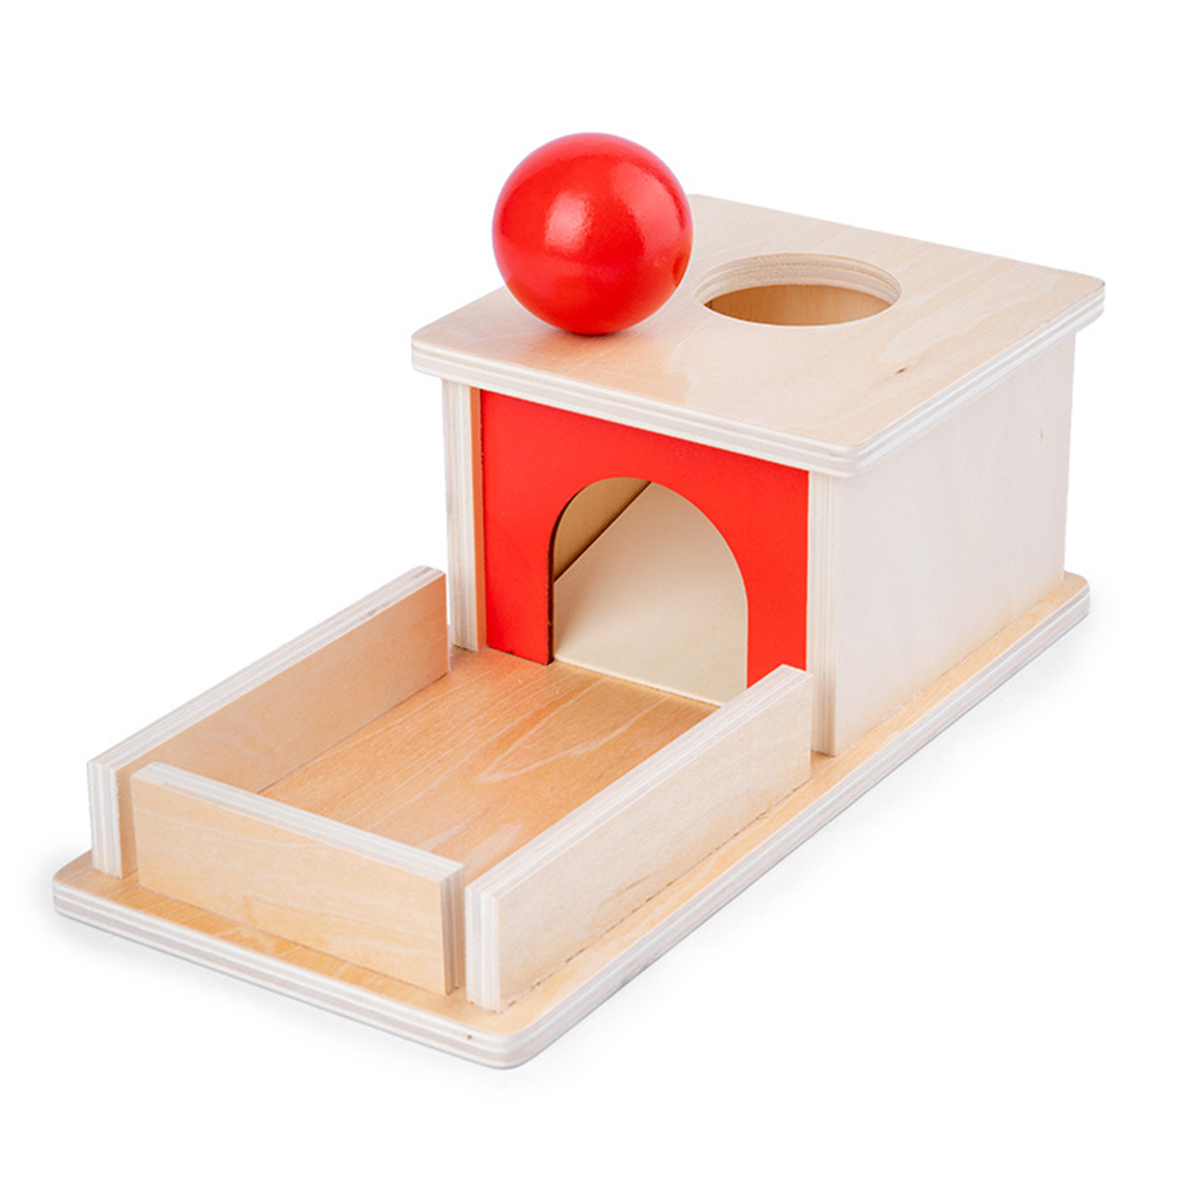 Montessori-Object-Permanence-Box-Wooden-Permanent-Box-Practical-Learning-Educational-Toy-for-Kids-Gi-1773227-3